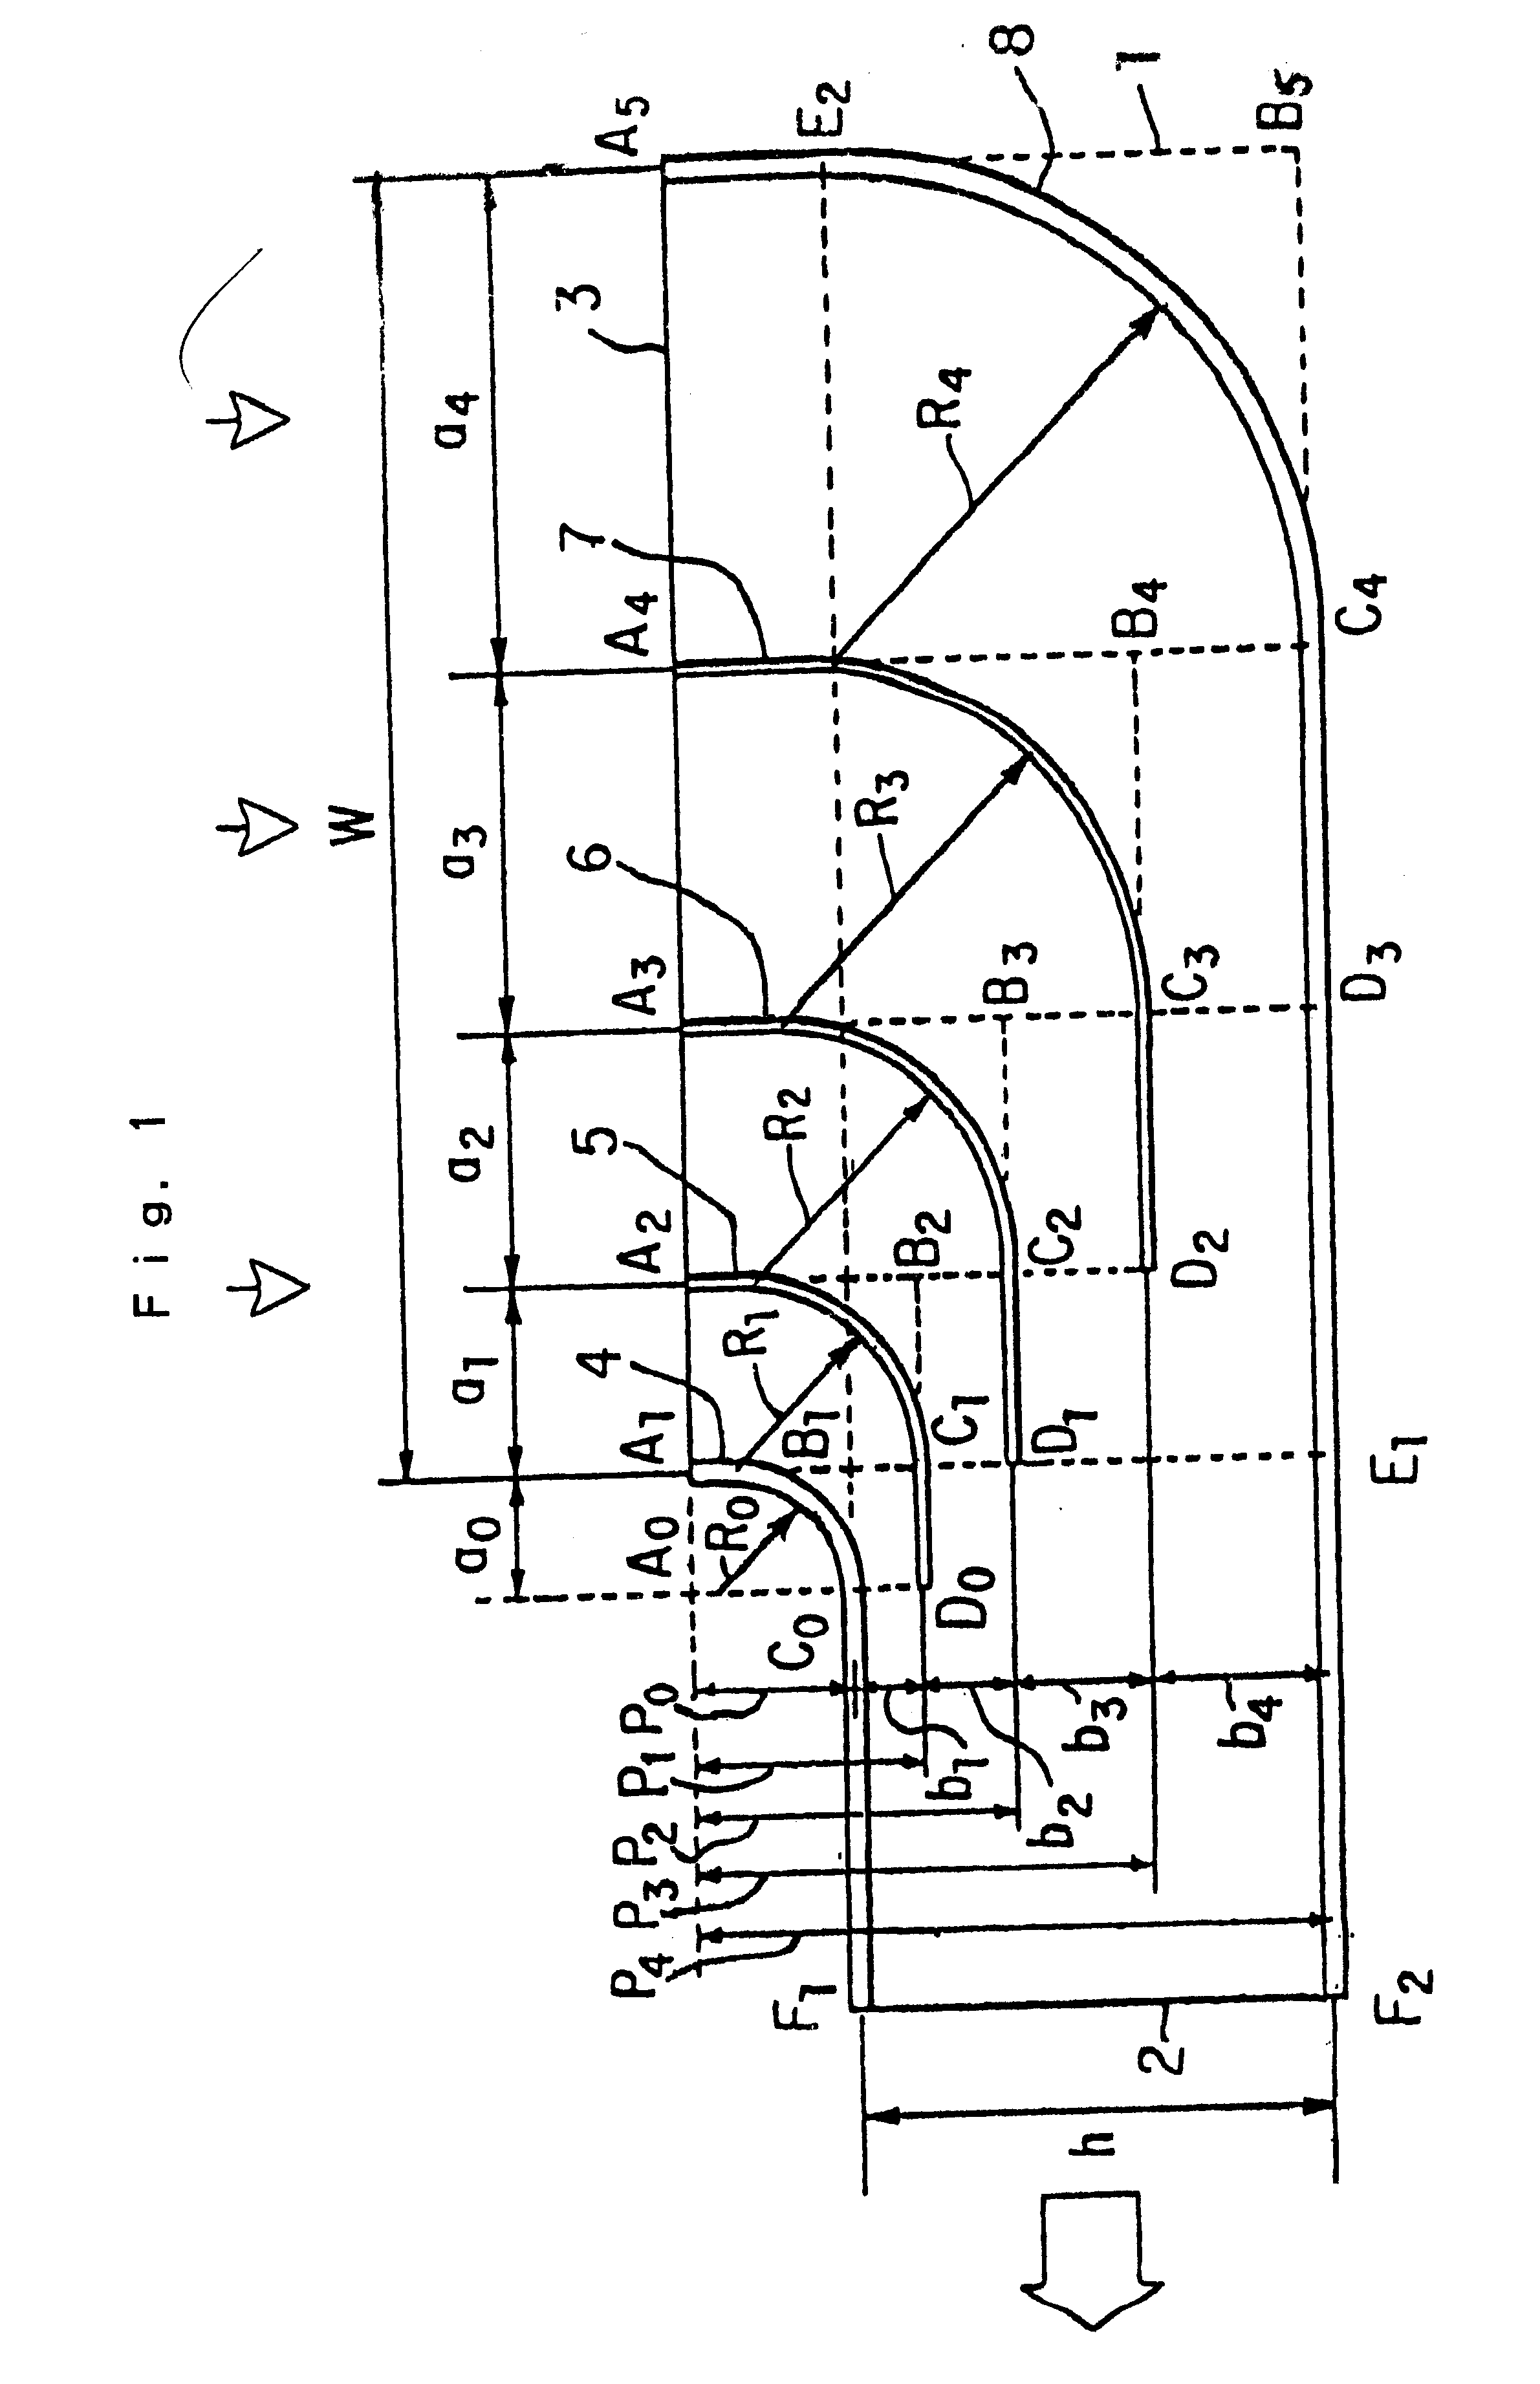 Suction elbow provided with built-in guide blades